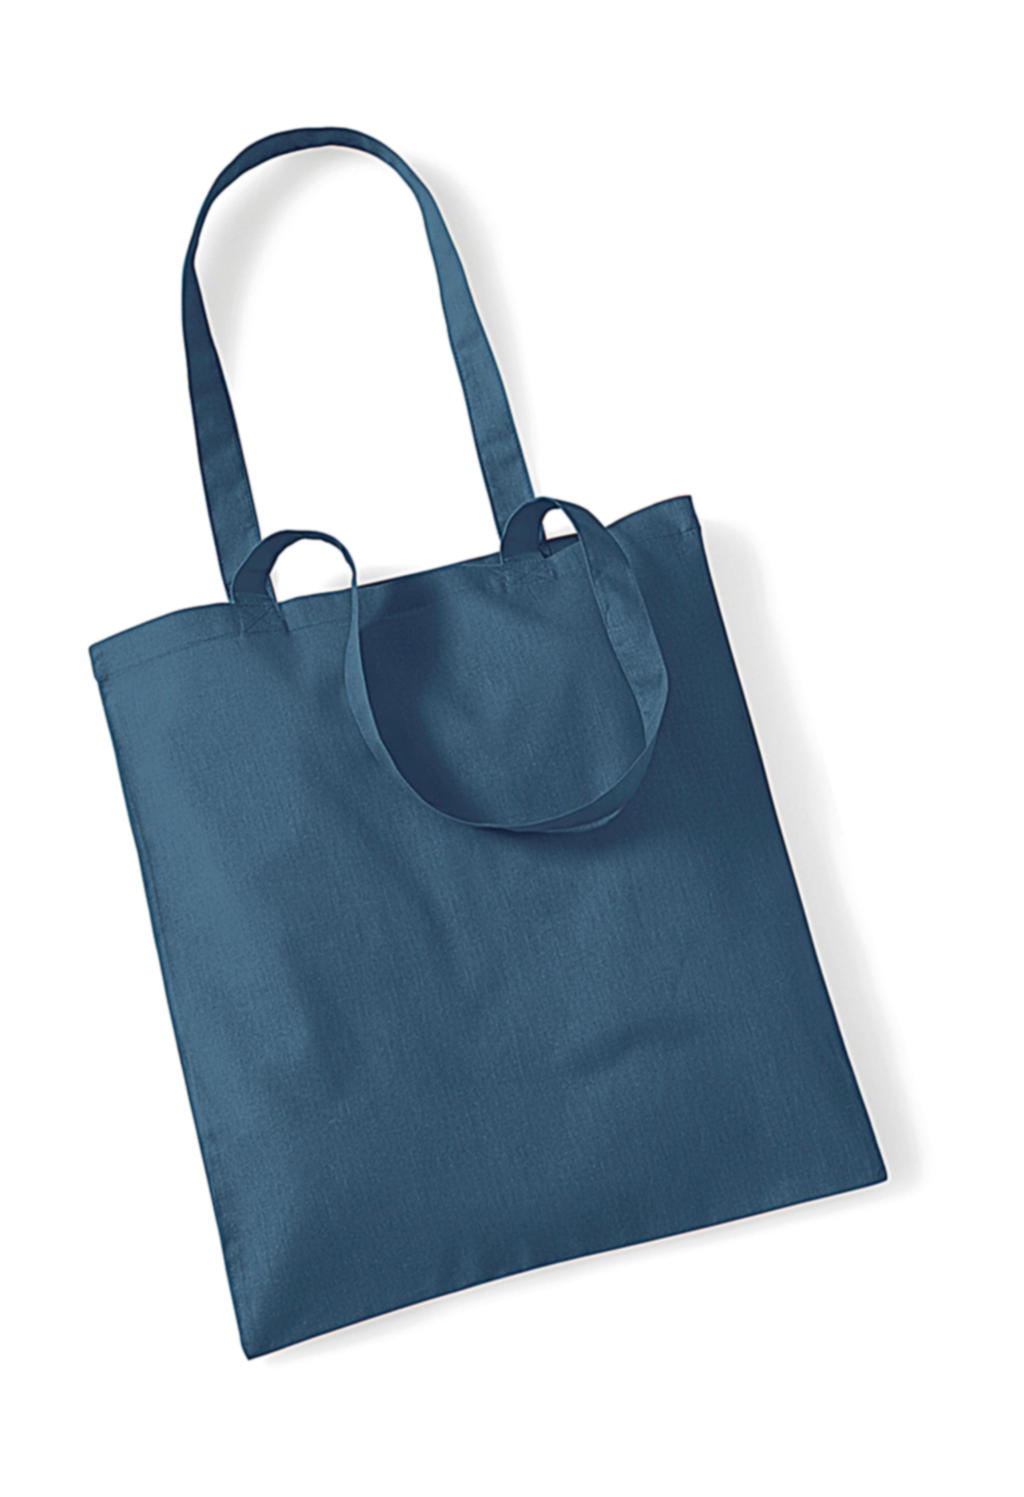  Bag for Life - Long Handles in Farbe Airforce Blue